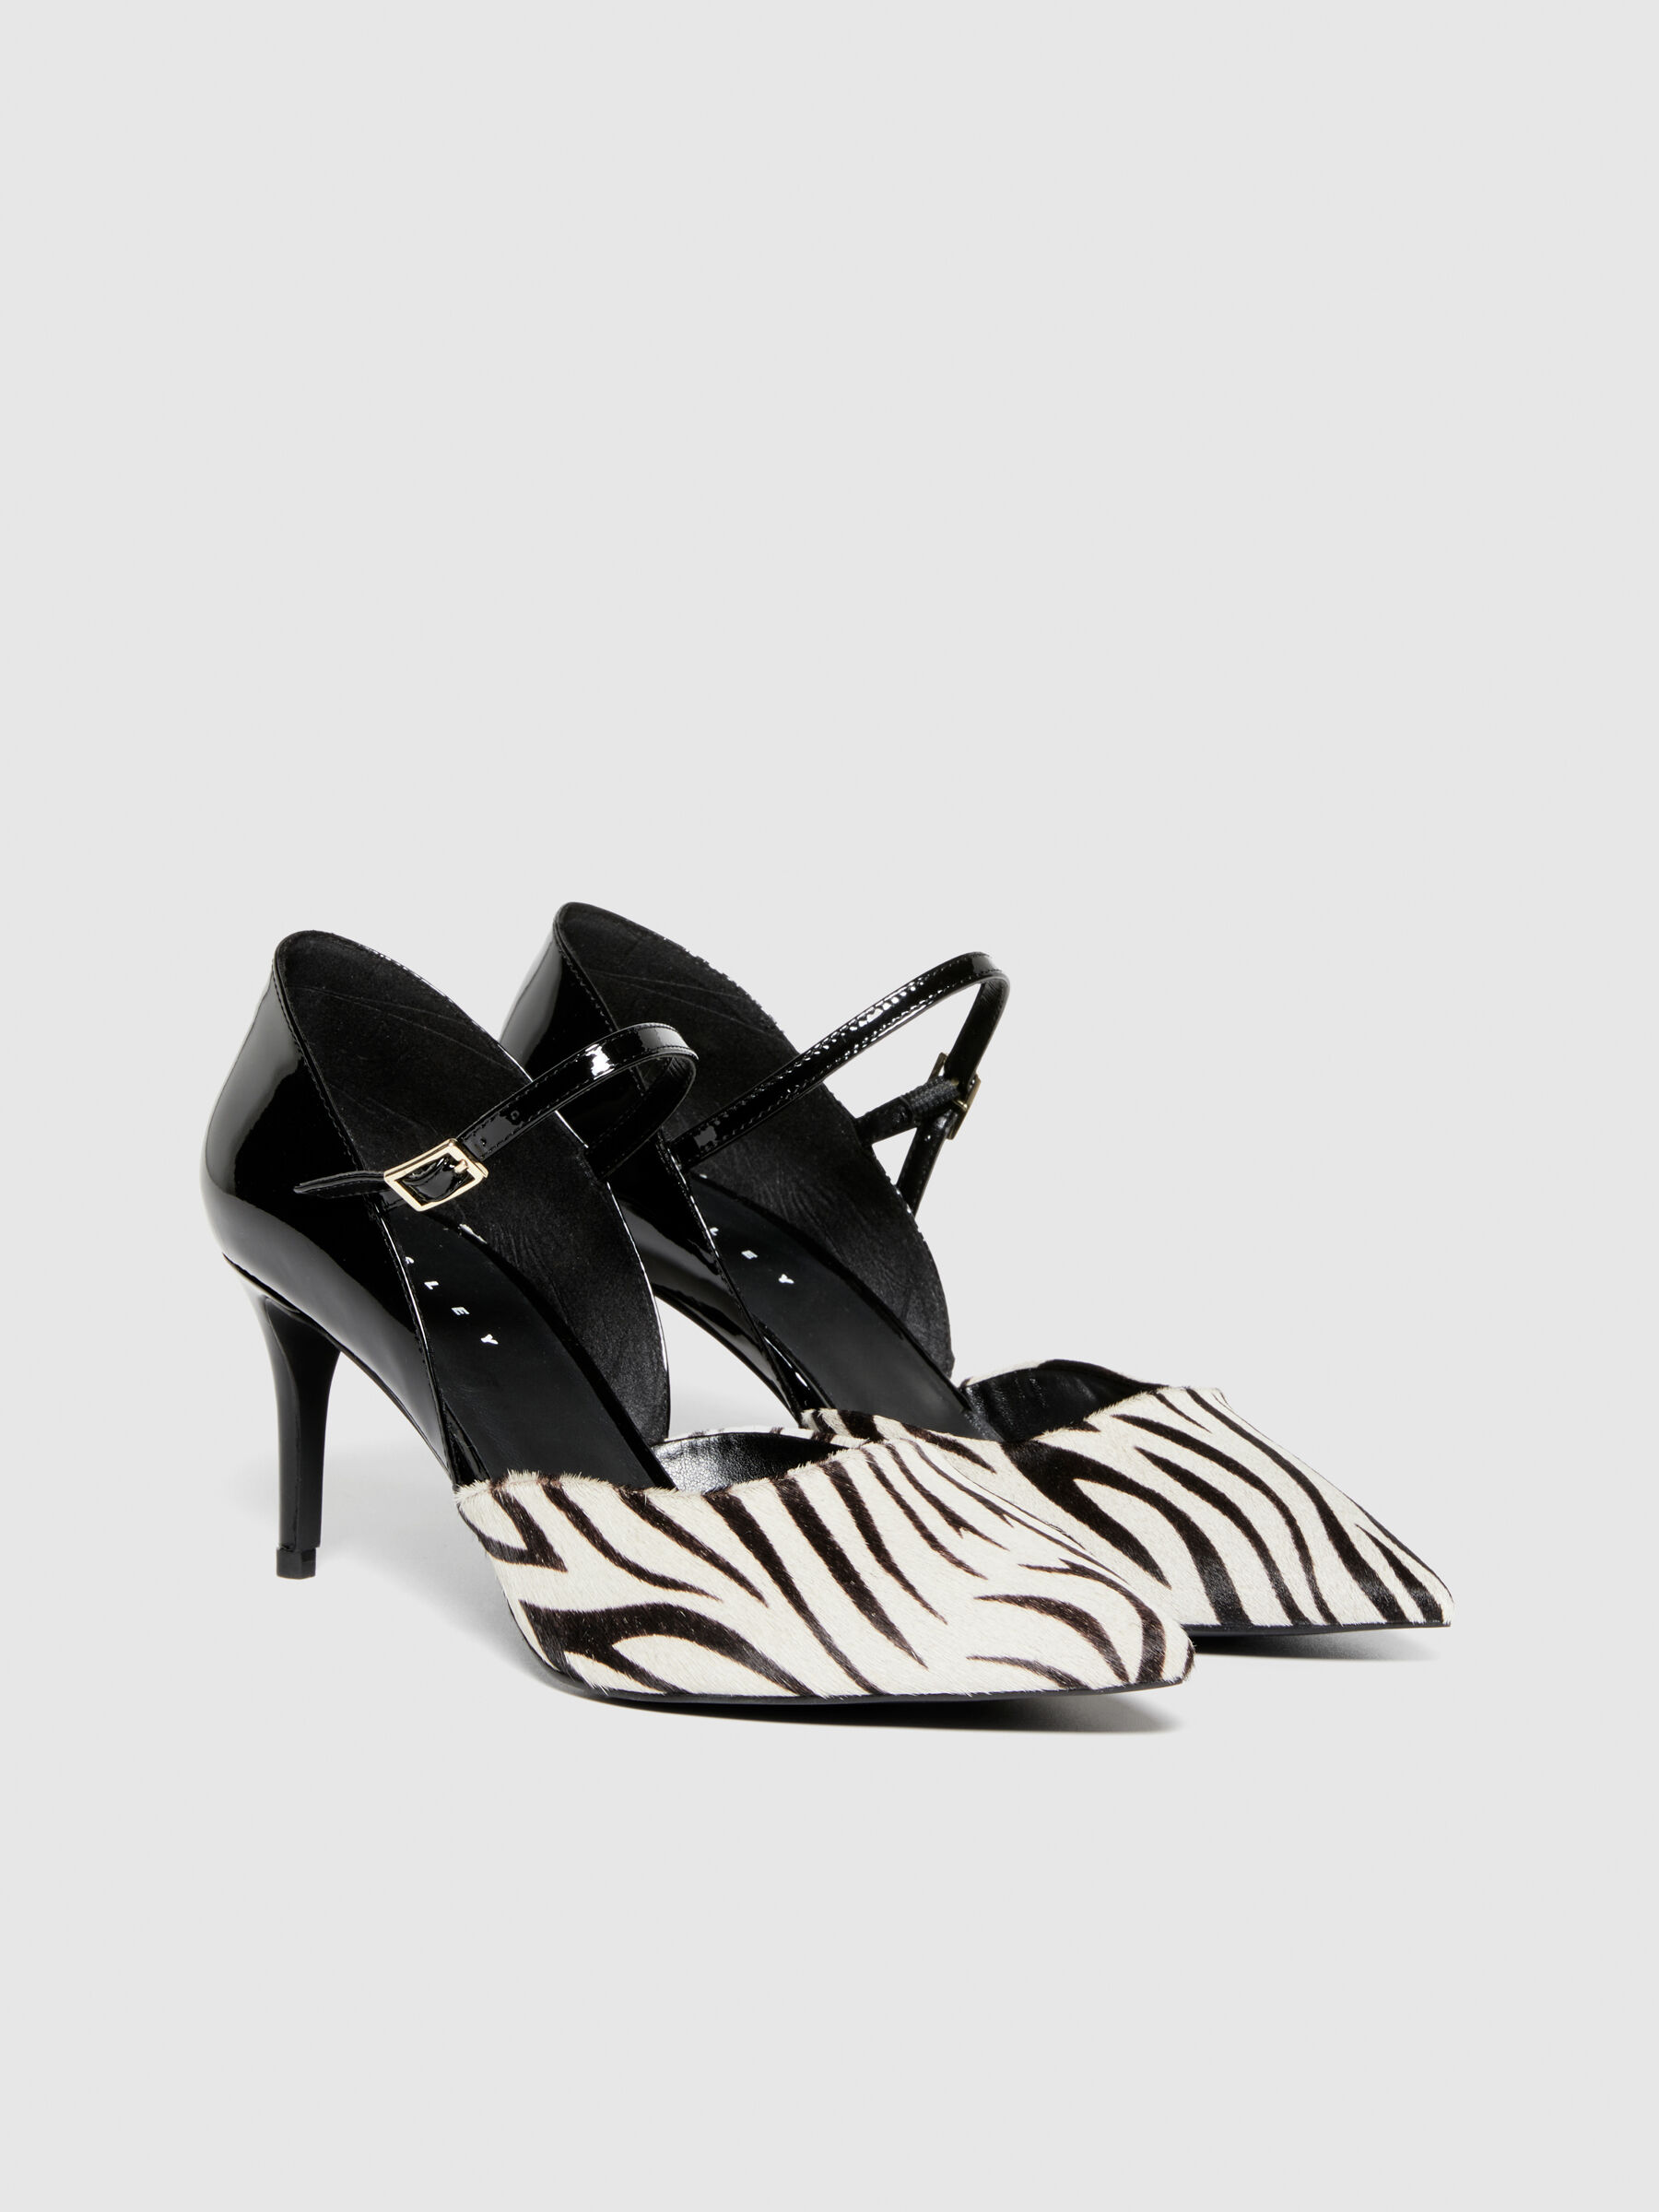 Matisse Chateau Zebra Print Cow Hair Leather Pumps Low Heels Size 6.5  Womens | eBay